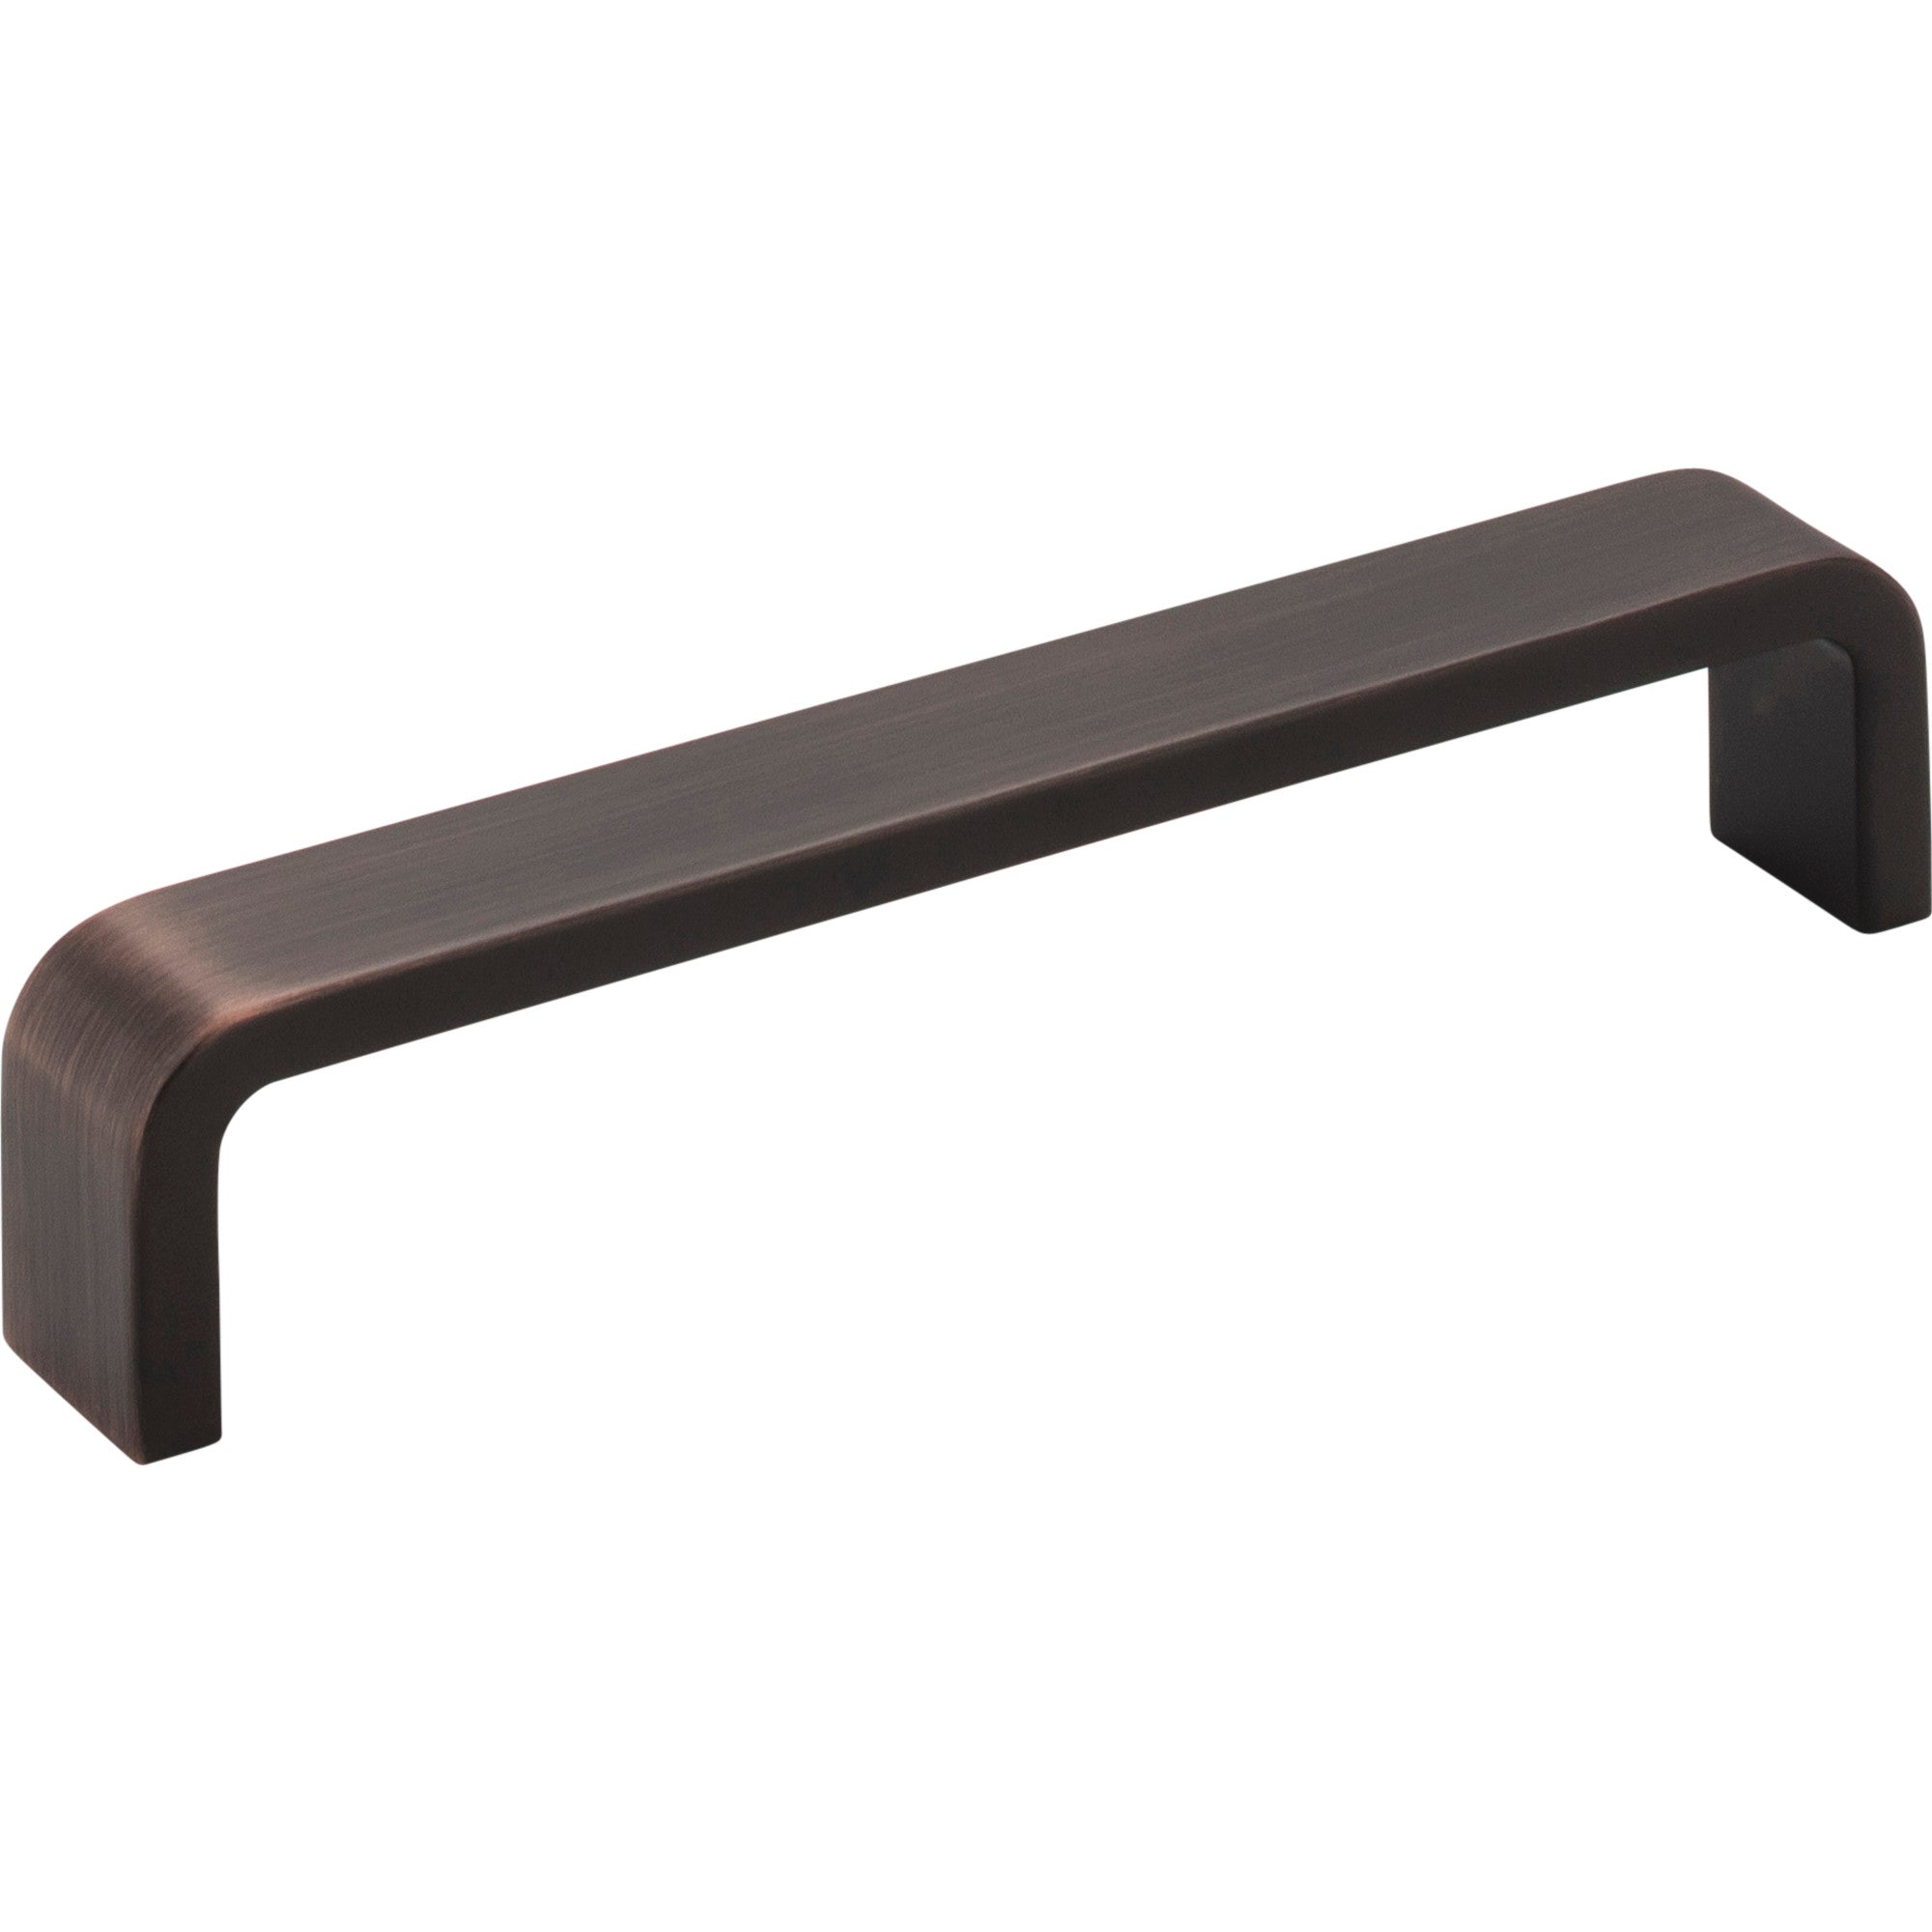 Elements 193-128 Asher 128 mm Center-to-Center  Square Asher Cabinet Pull